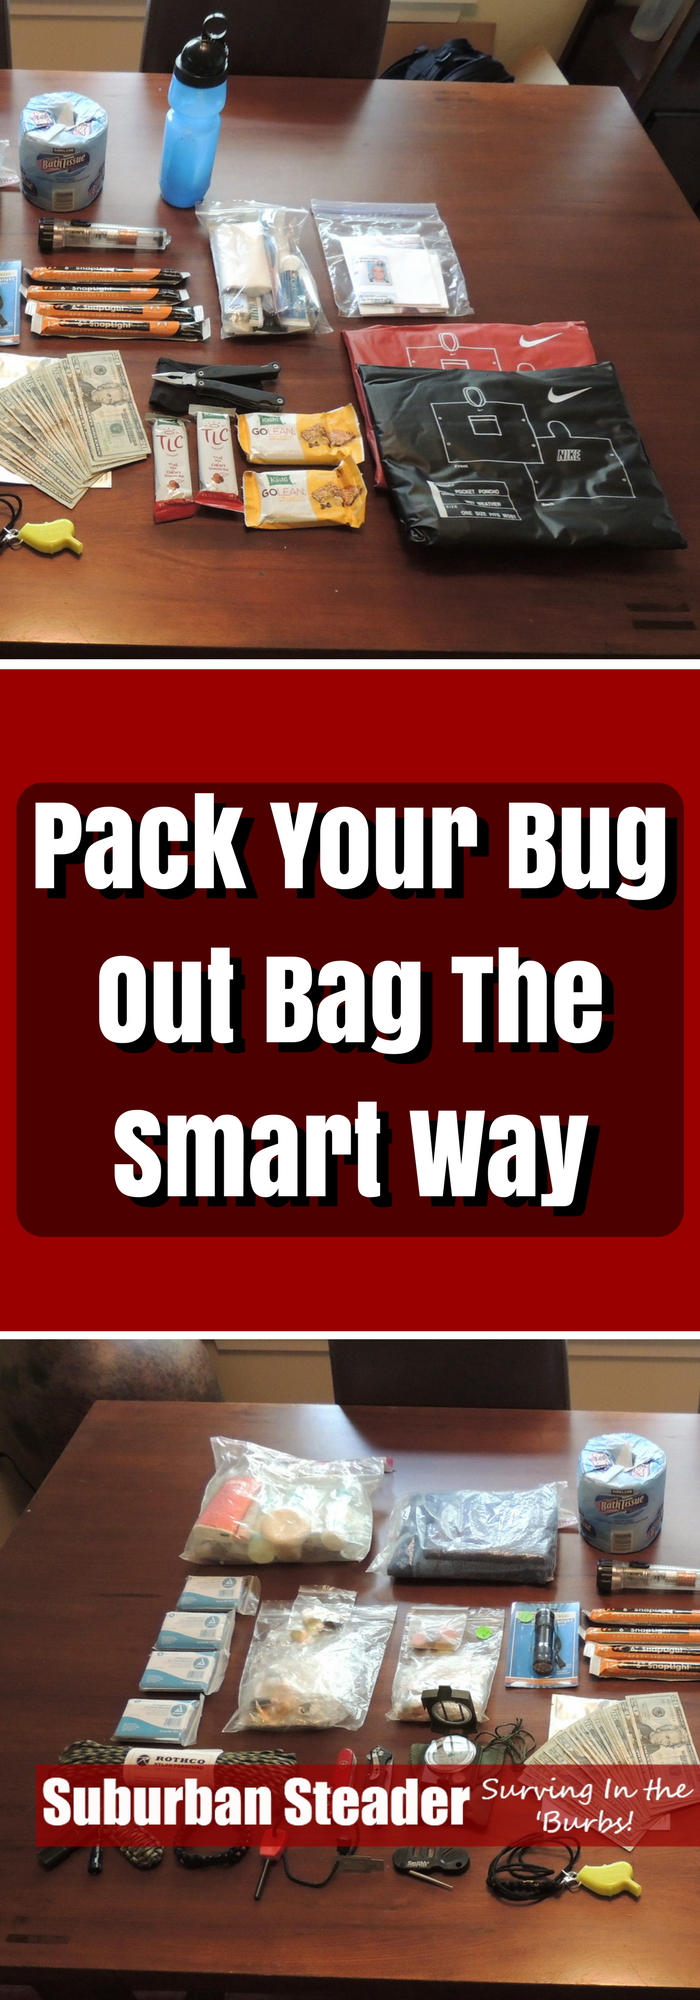 Pack Your Bug Out Bag - Feature